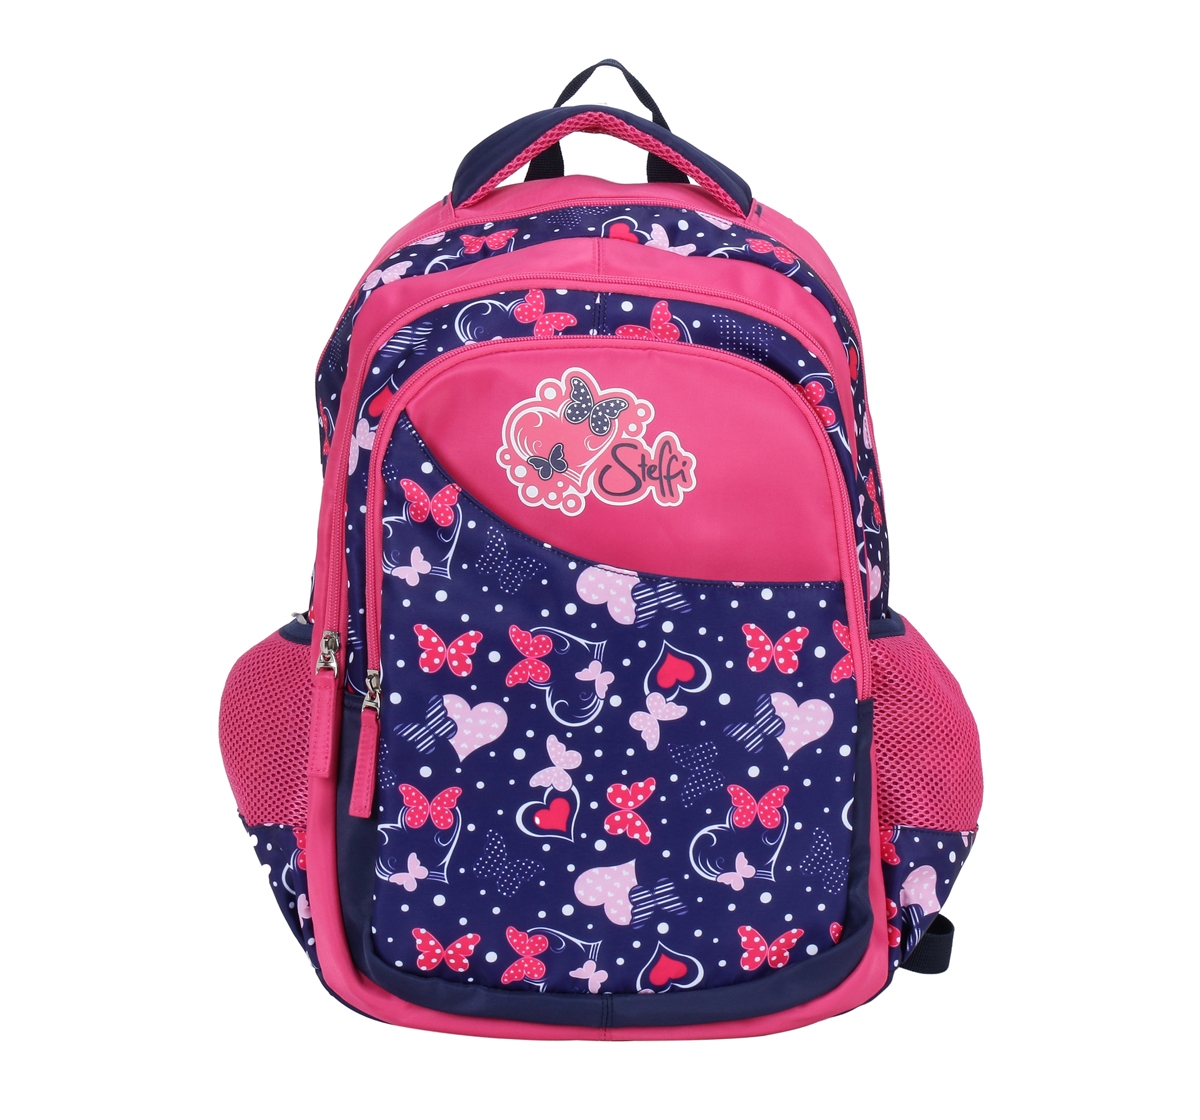 Simba | Simba Steffi Love Rising Sparkle Pink 19 Backpack Multicolor 3Y+